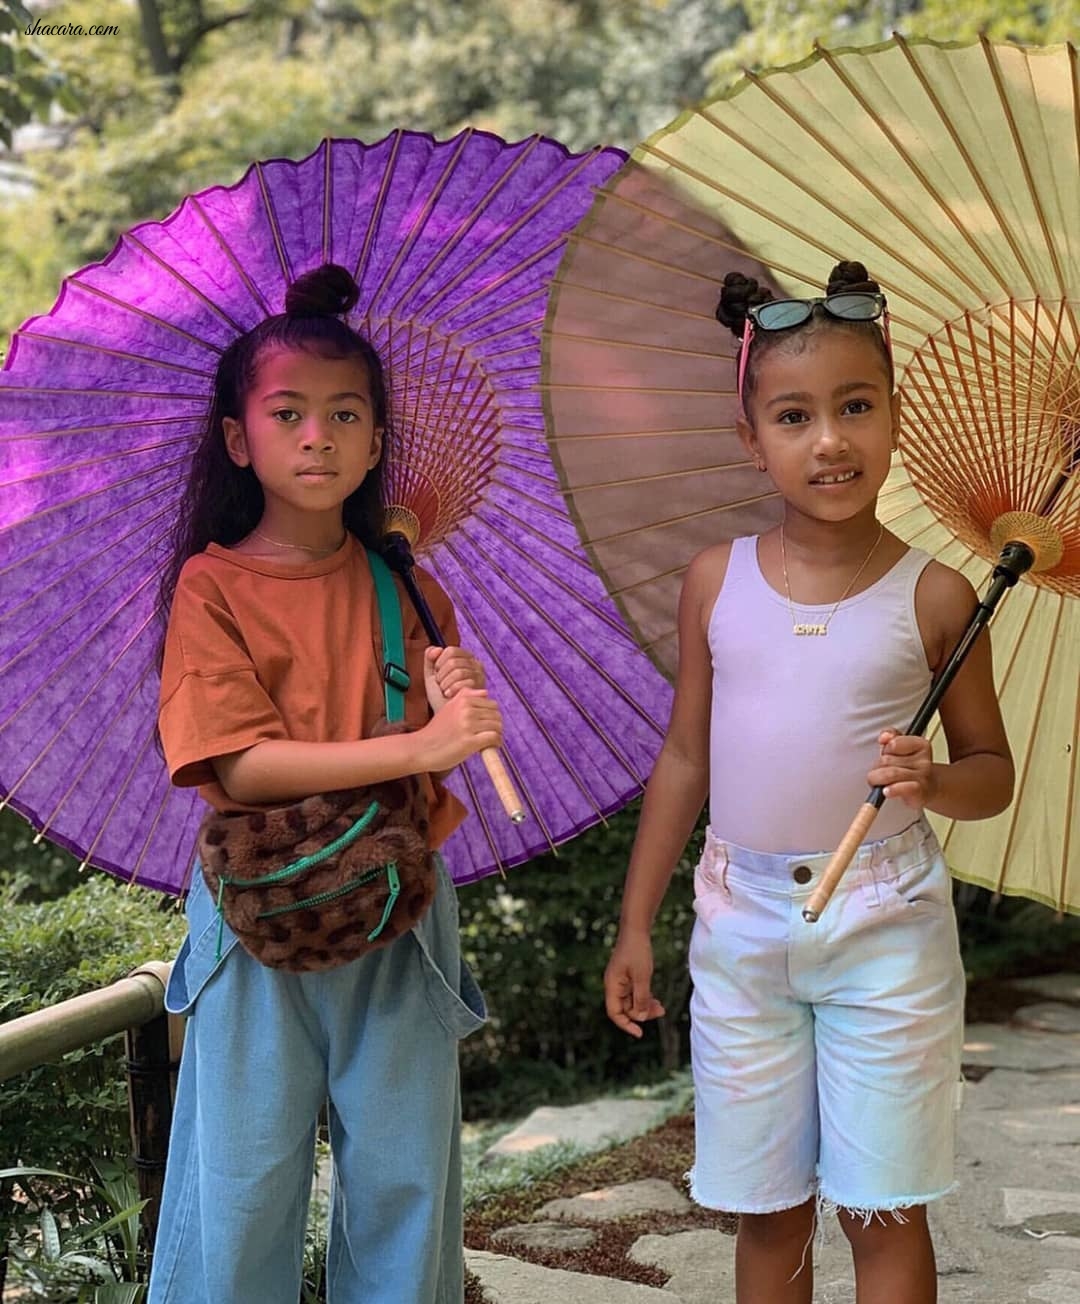 Kanye West & Kim Kardashian Drop Fabulous Images Of Their Children In Japan And It’s Beyond Beautiful